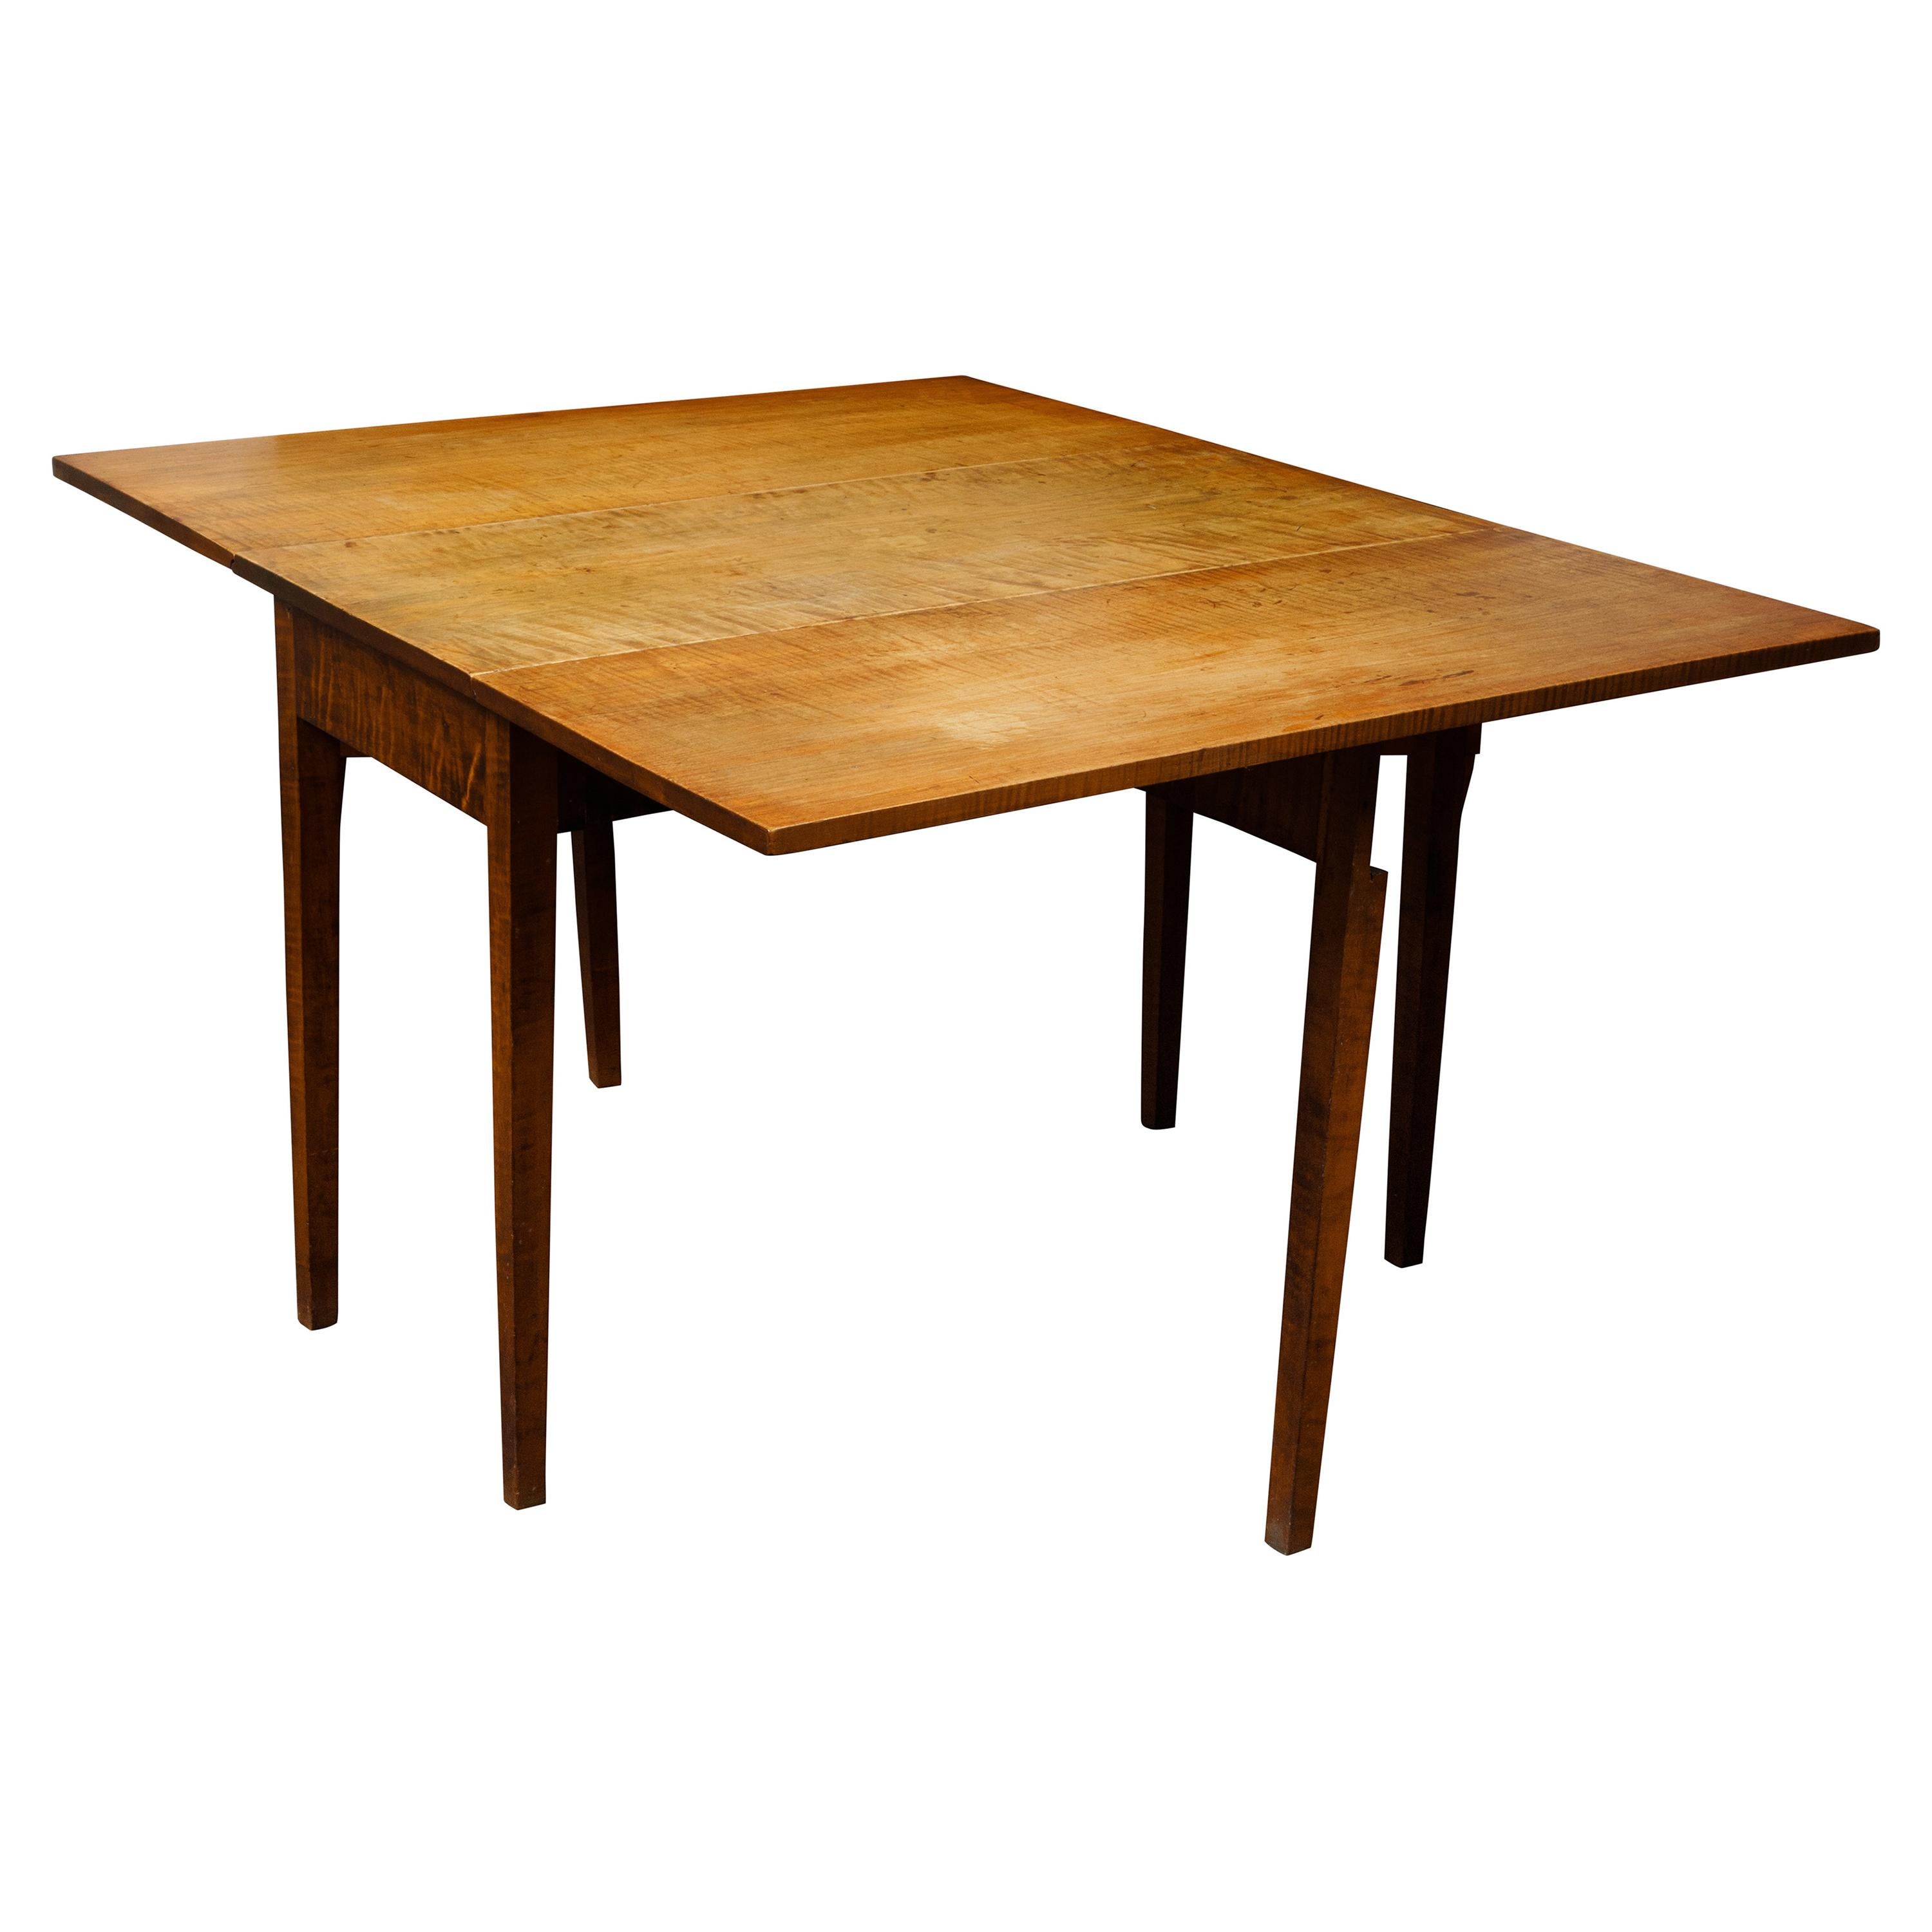 American 19th Century Maple Drop-Leaf Table with Tapered Legs For Sale